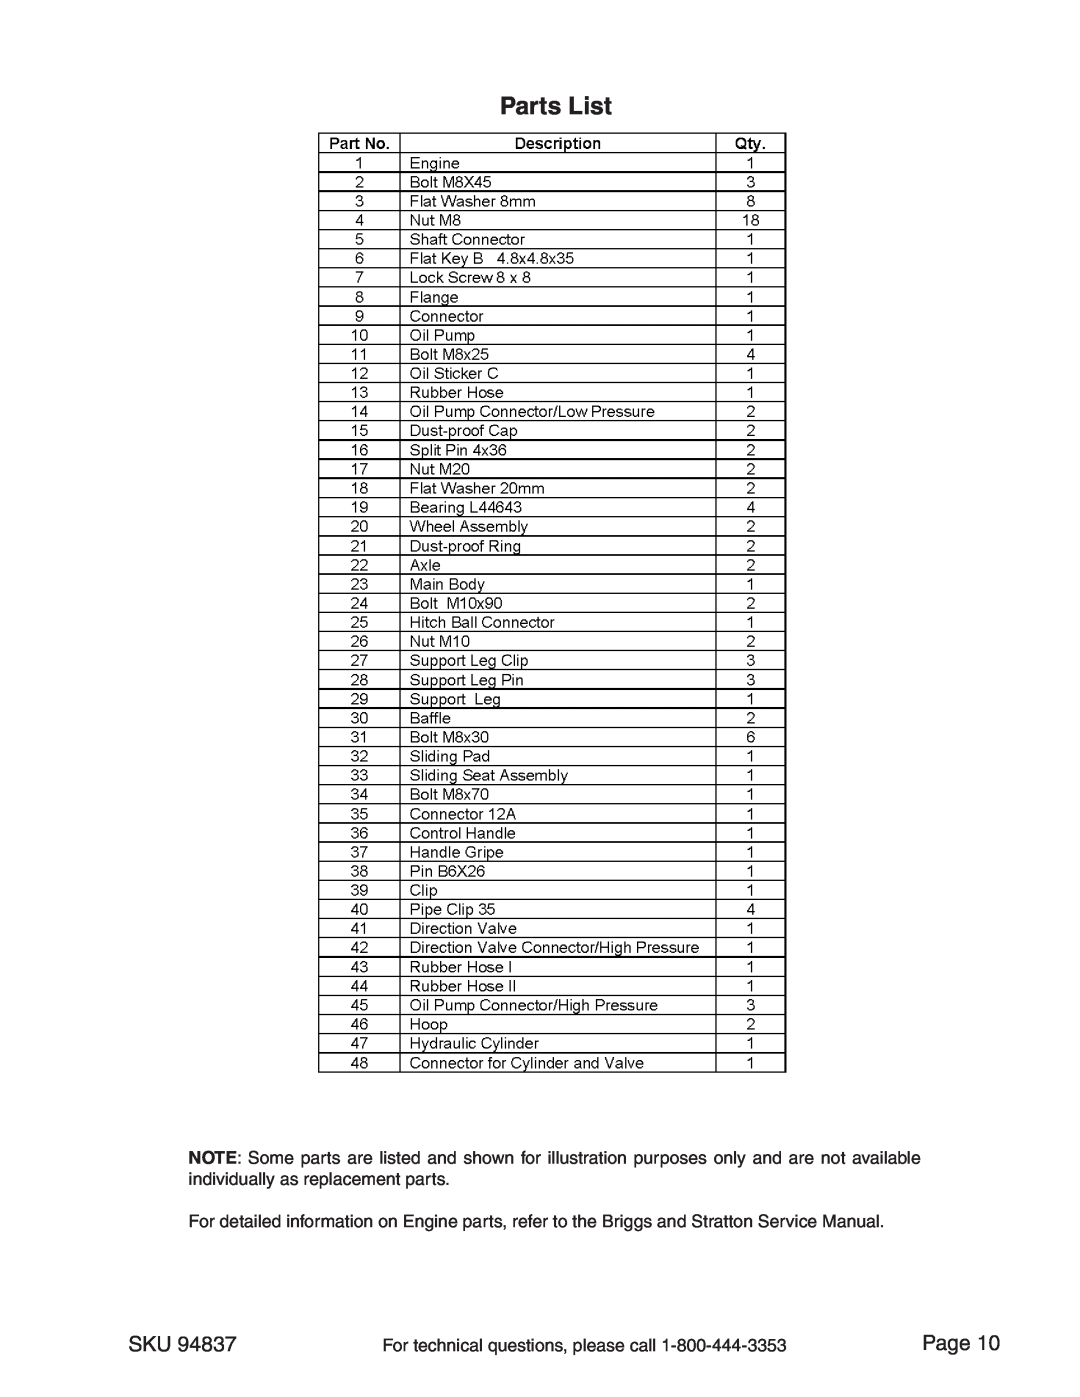 Harbor Freight Tools 94837 manual Parts List, Page 